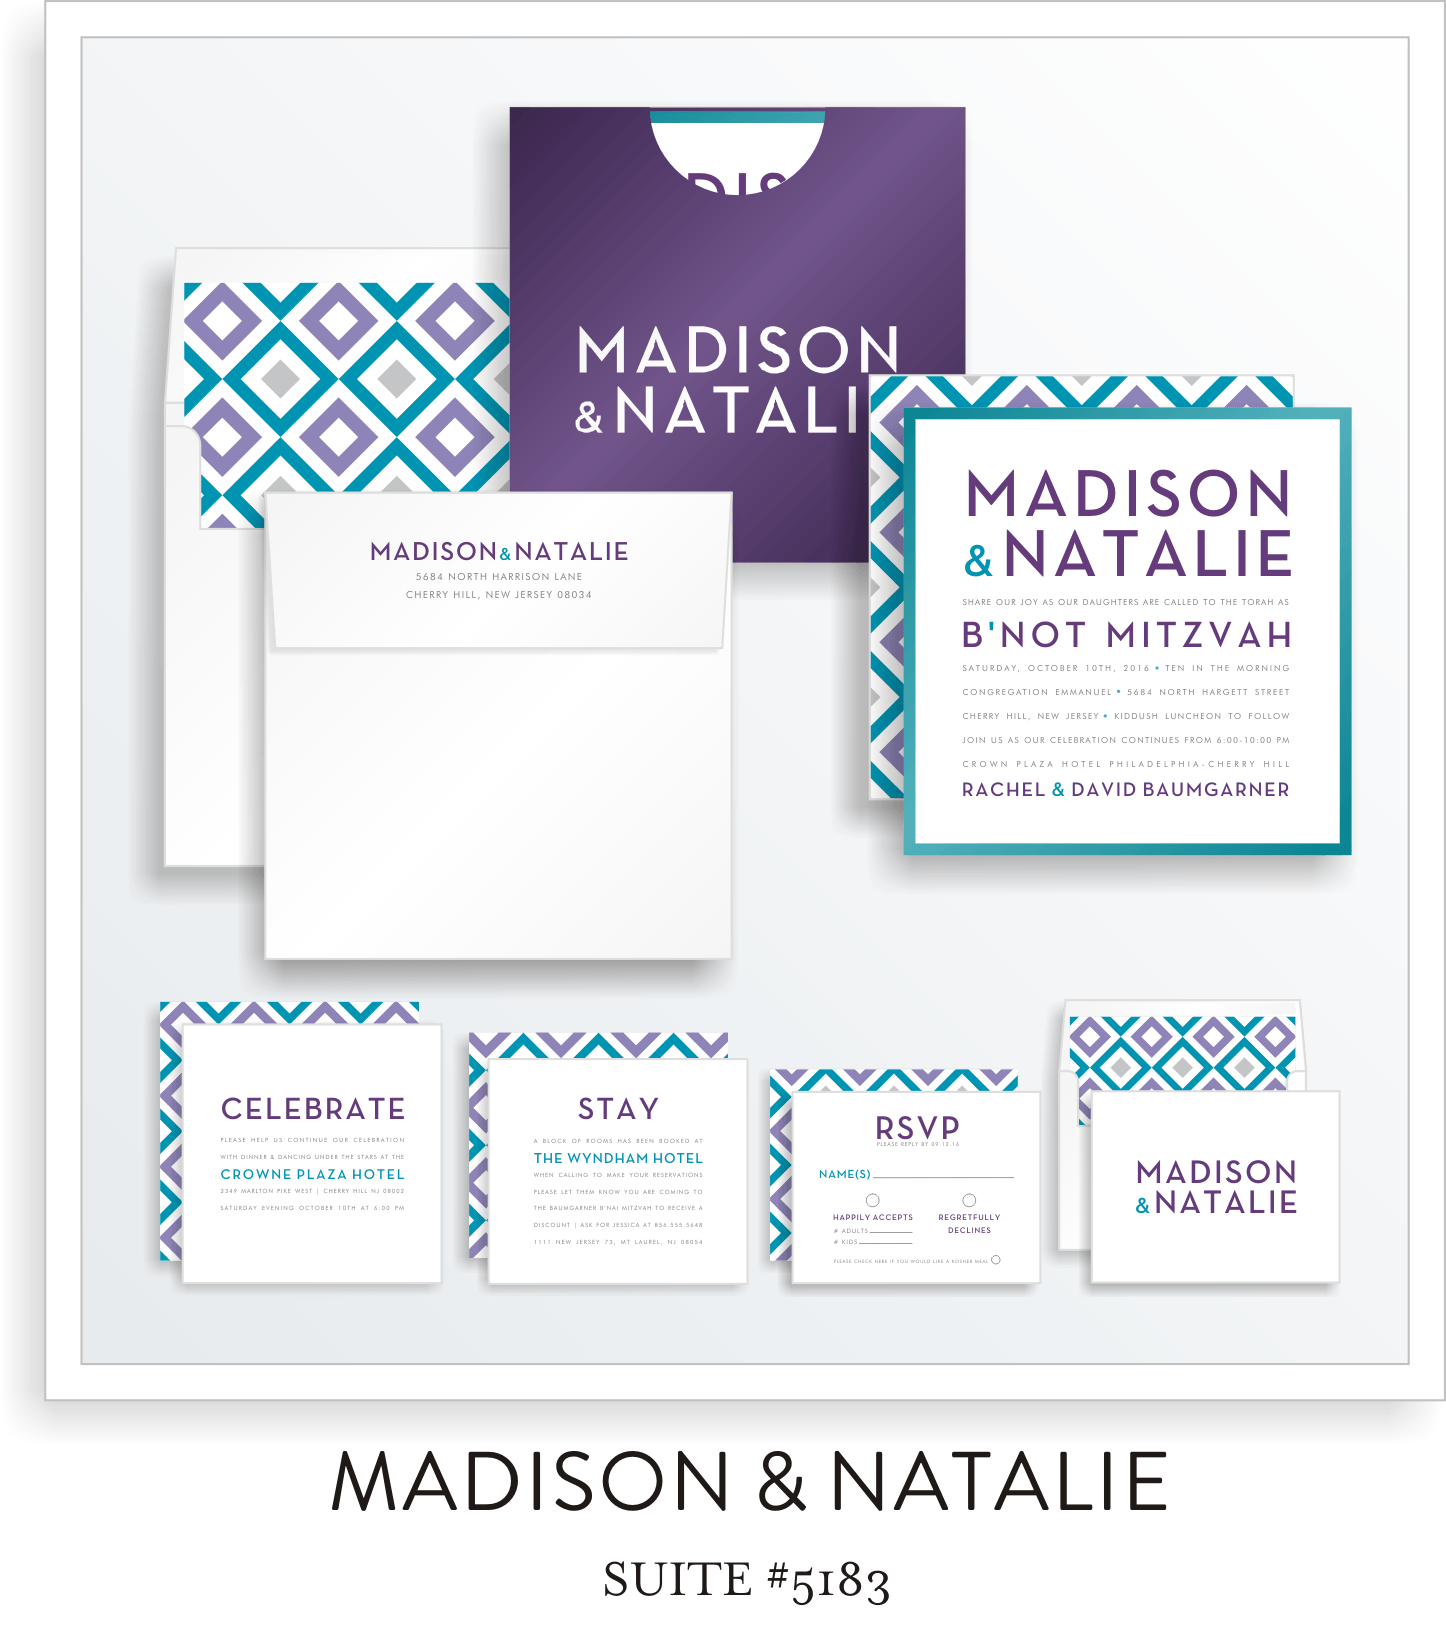 Copy of Copy of B'not Mitzvah Invitation Suite 5183 - Madison & Natalie